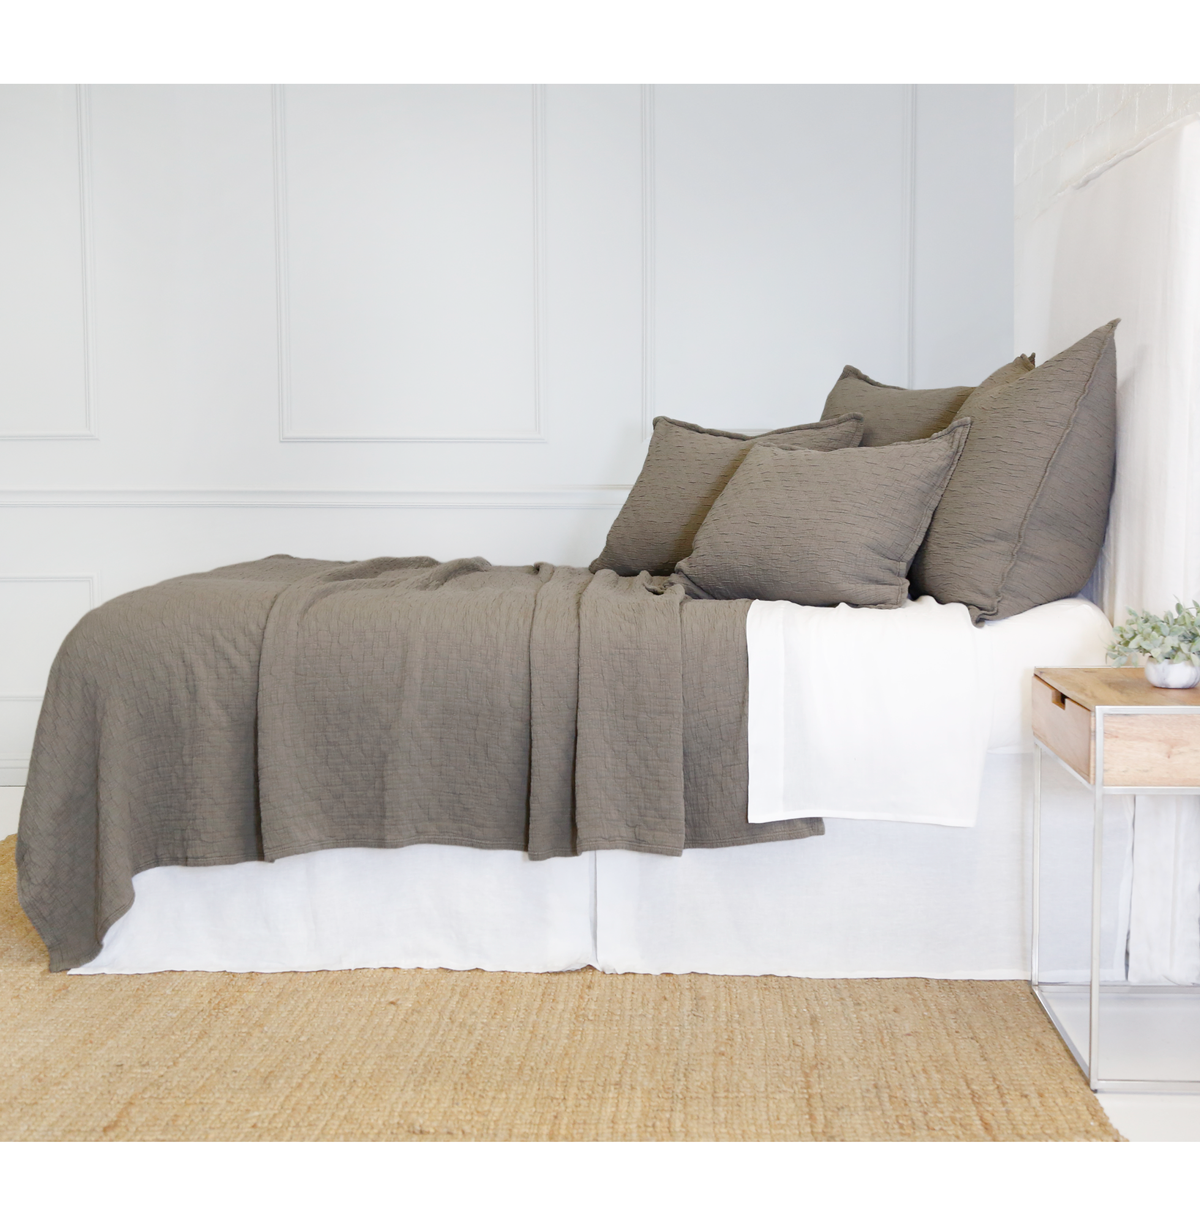 ojai matelasse collection - 4 colors - coverlet - pom pom at home